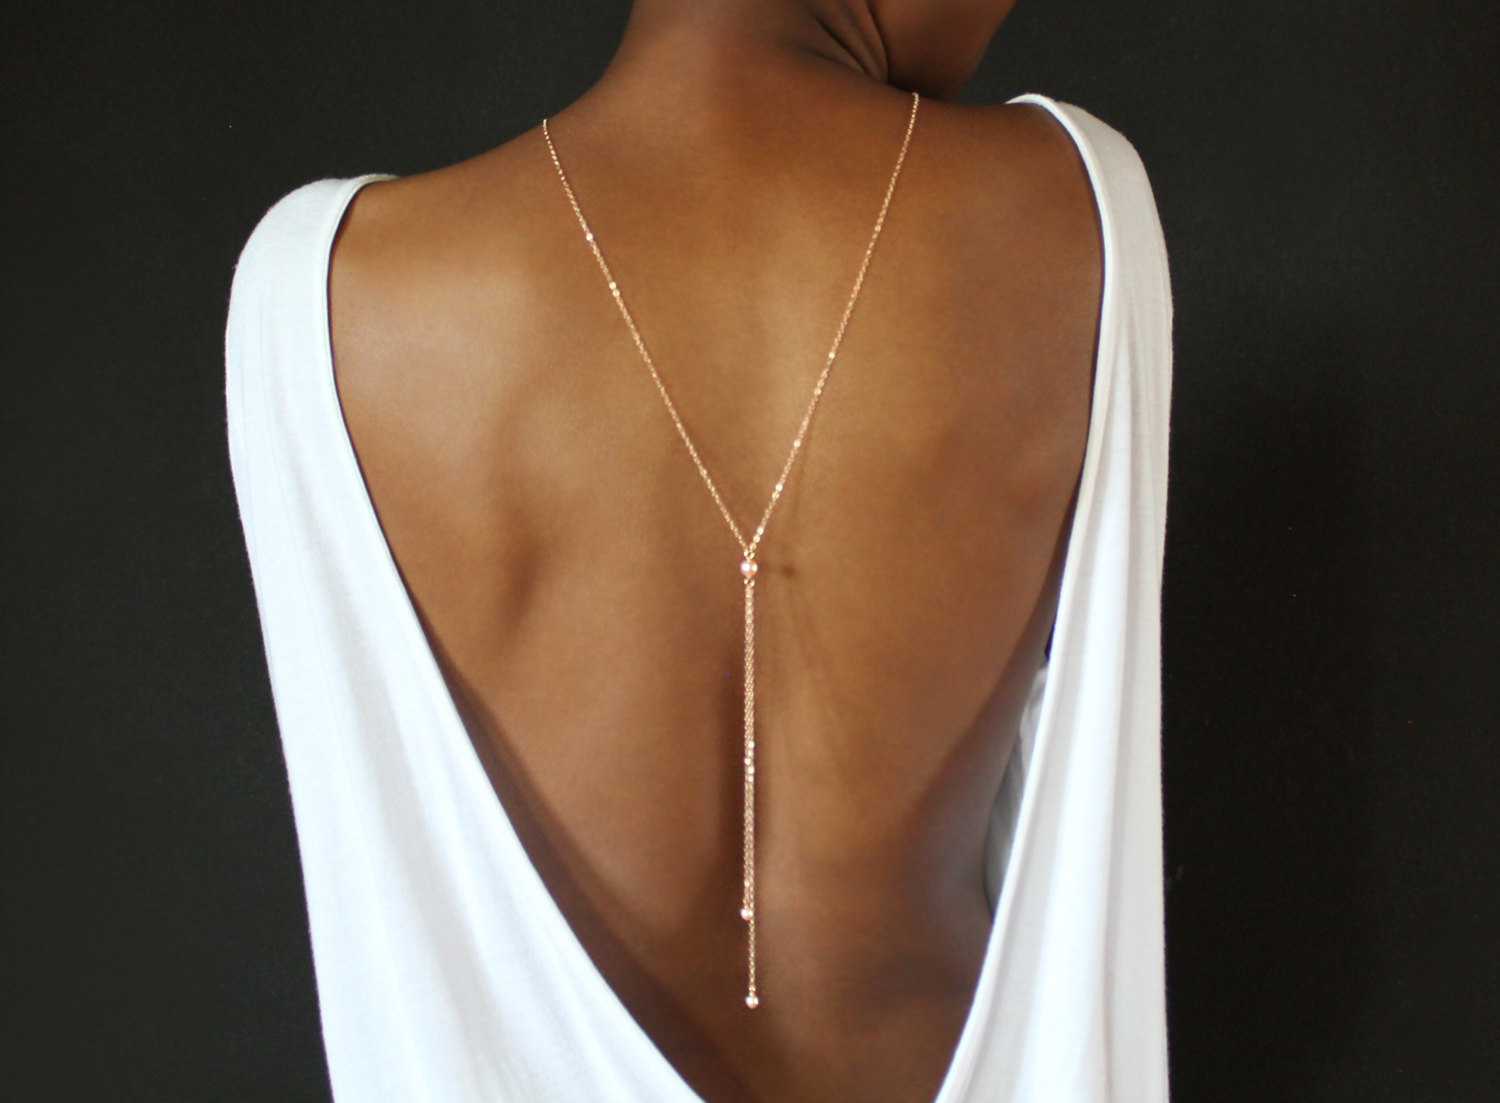 Necklace Style